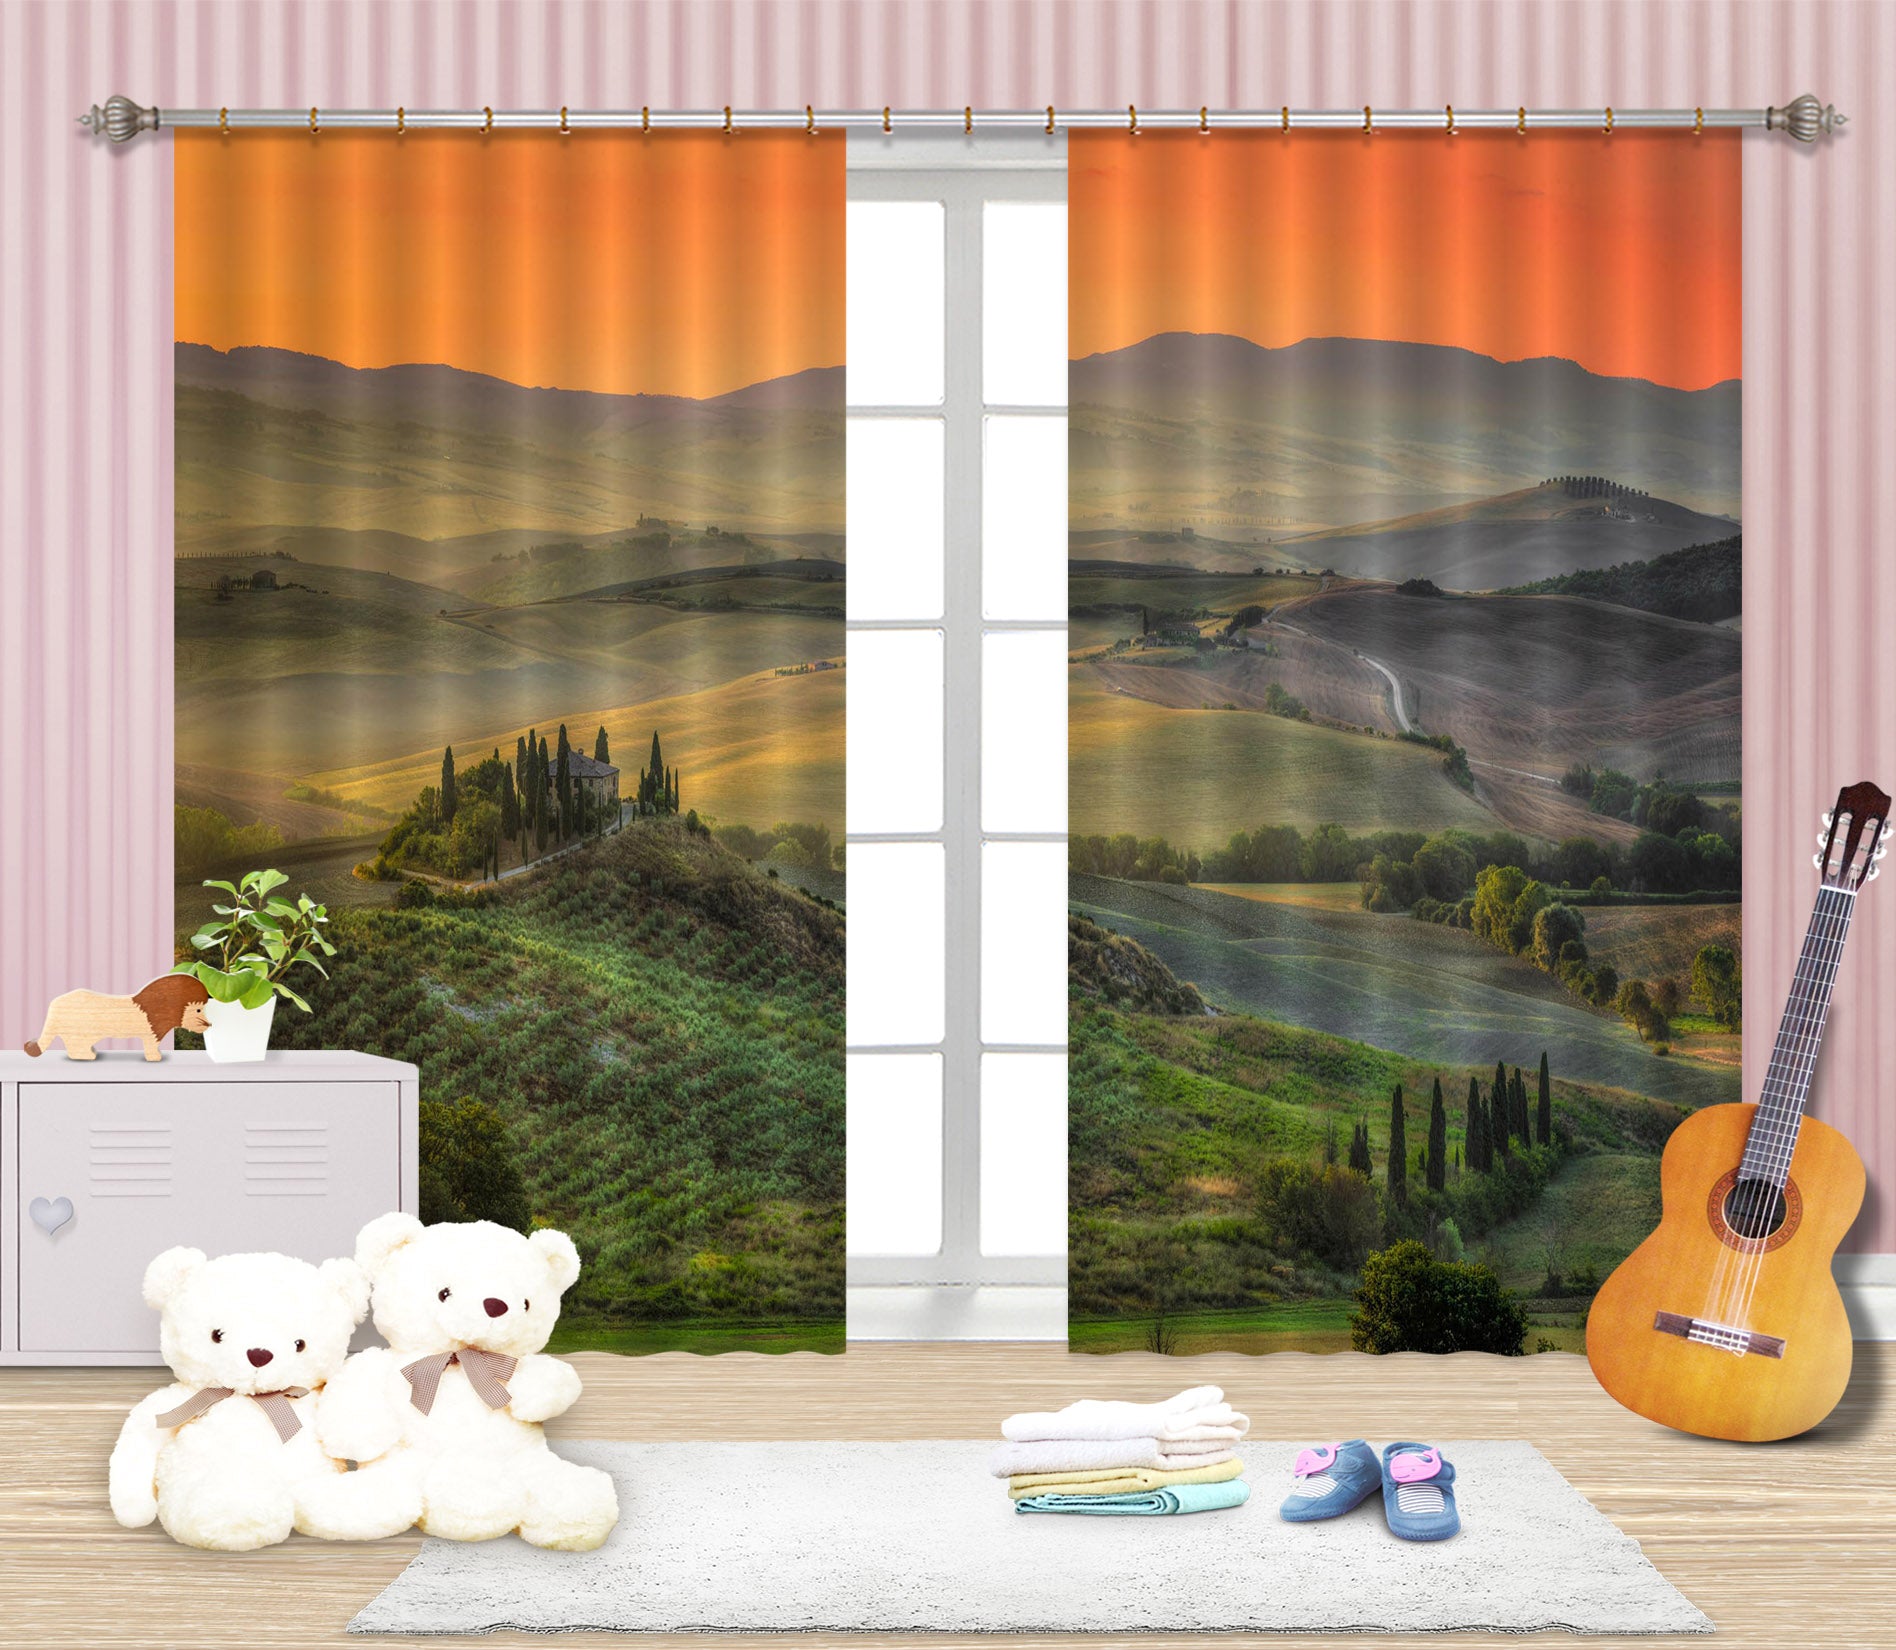 3D Valley At Dusk 104 Marco Carmassi Curtain Curtains Drapes